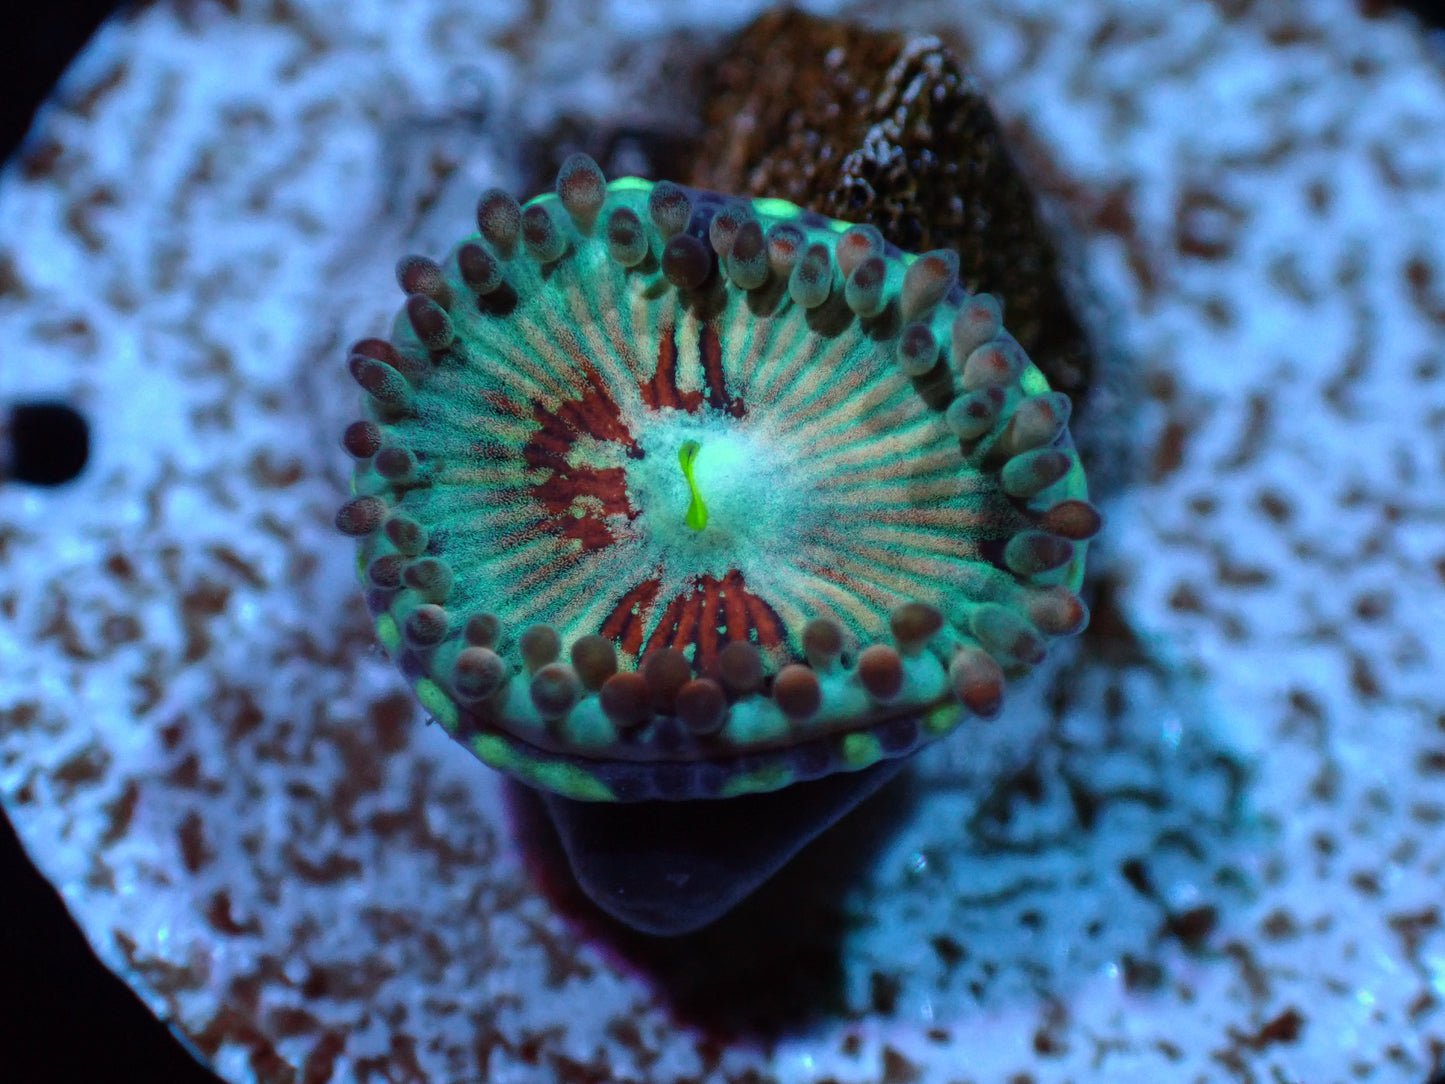 Salted Agave Zoa Auctions 4/17 ended